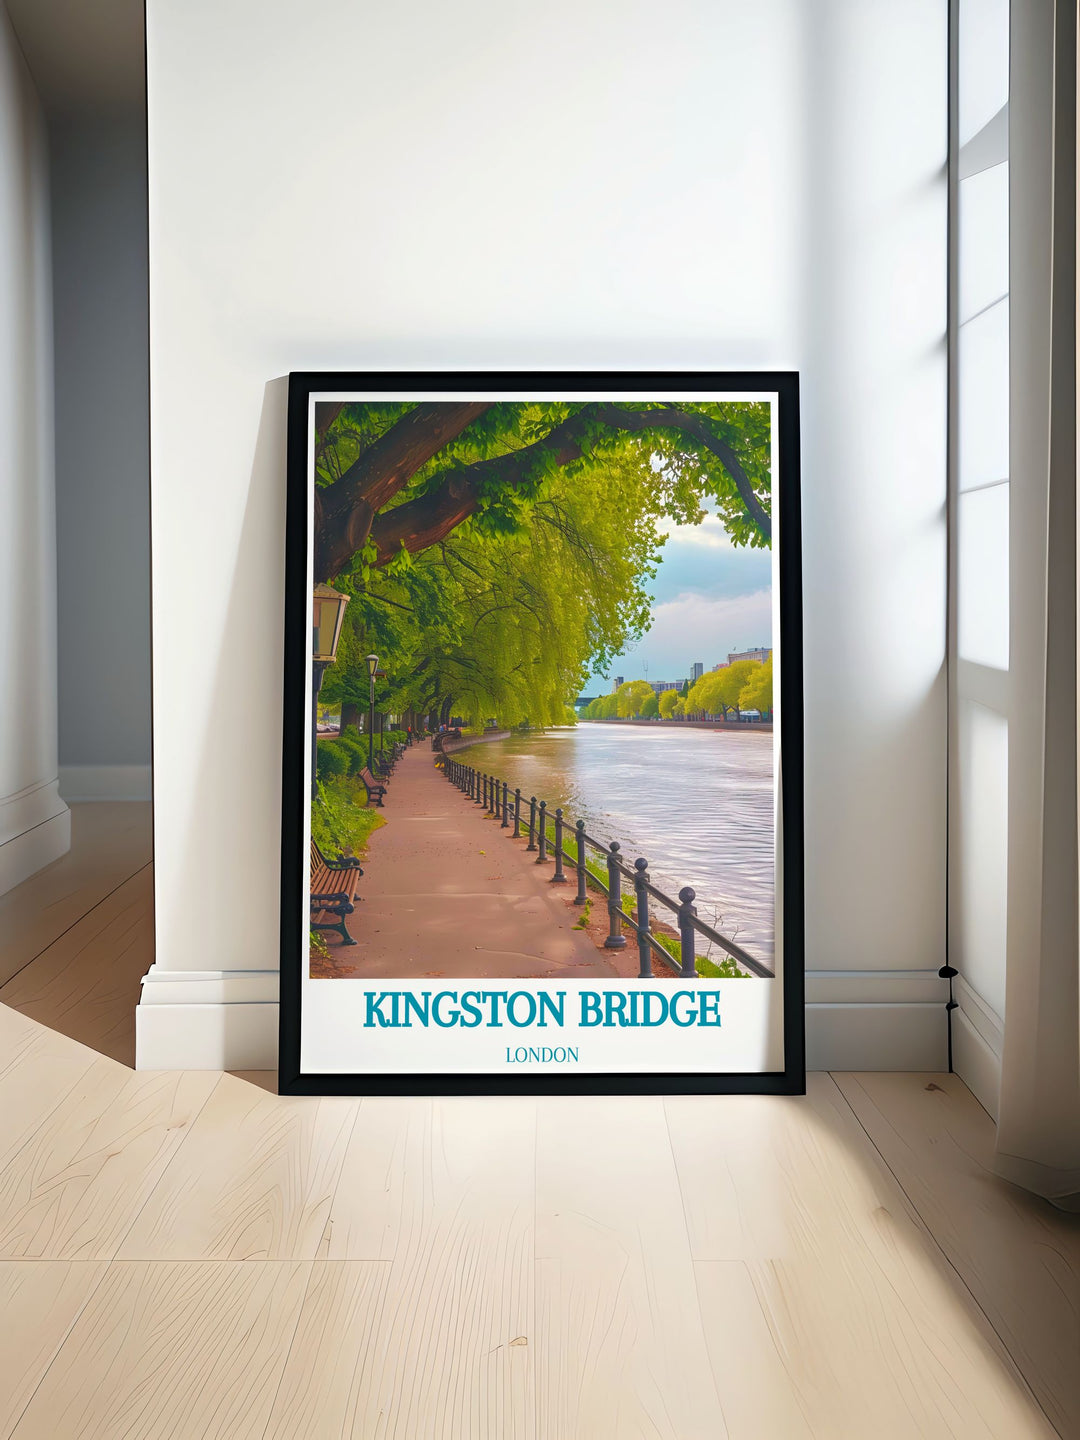 This travel poster captures the historical significance of Kingston Bridge in London, showcasing its architectural elegance and timeless charm.